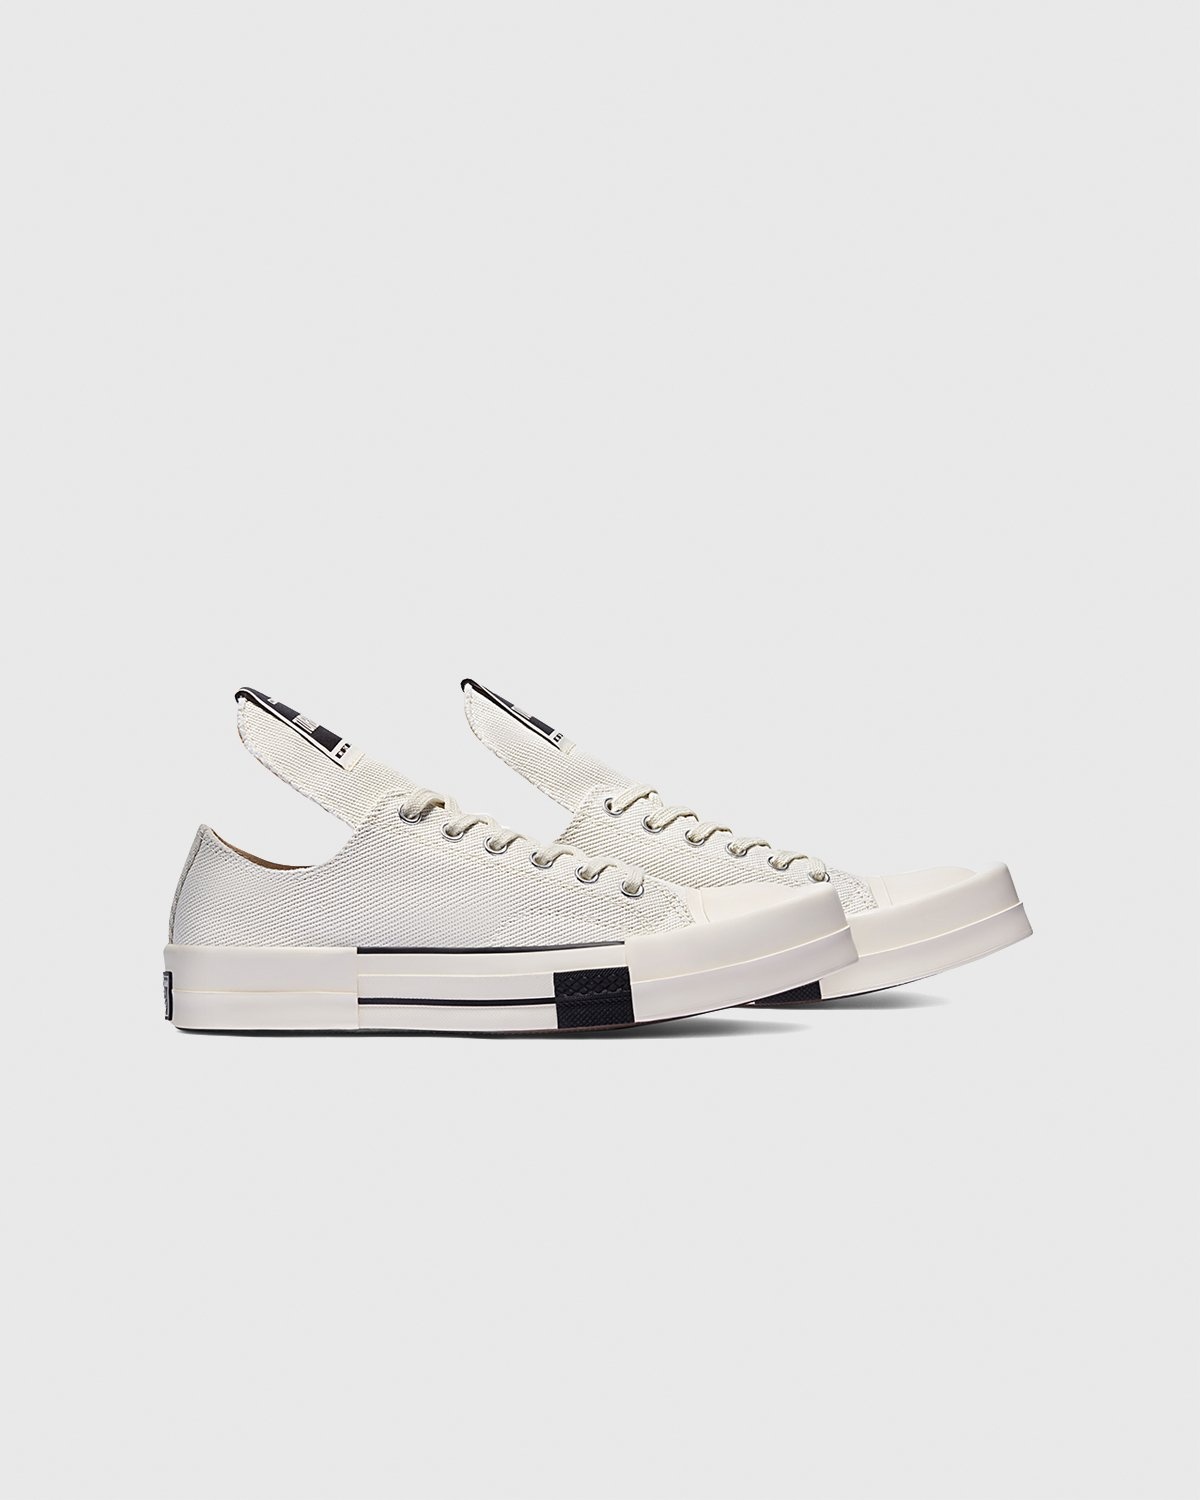 Converse – DRKSHDW TURBODRK Chuck 70 White - Sneakers - White - Image 12